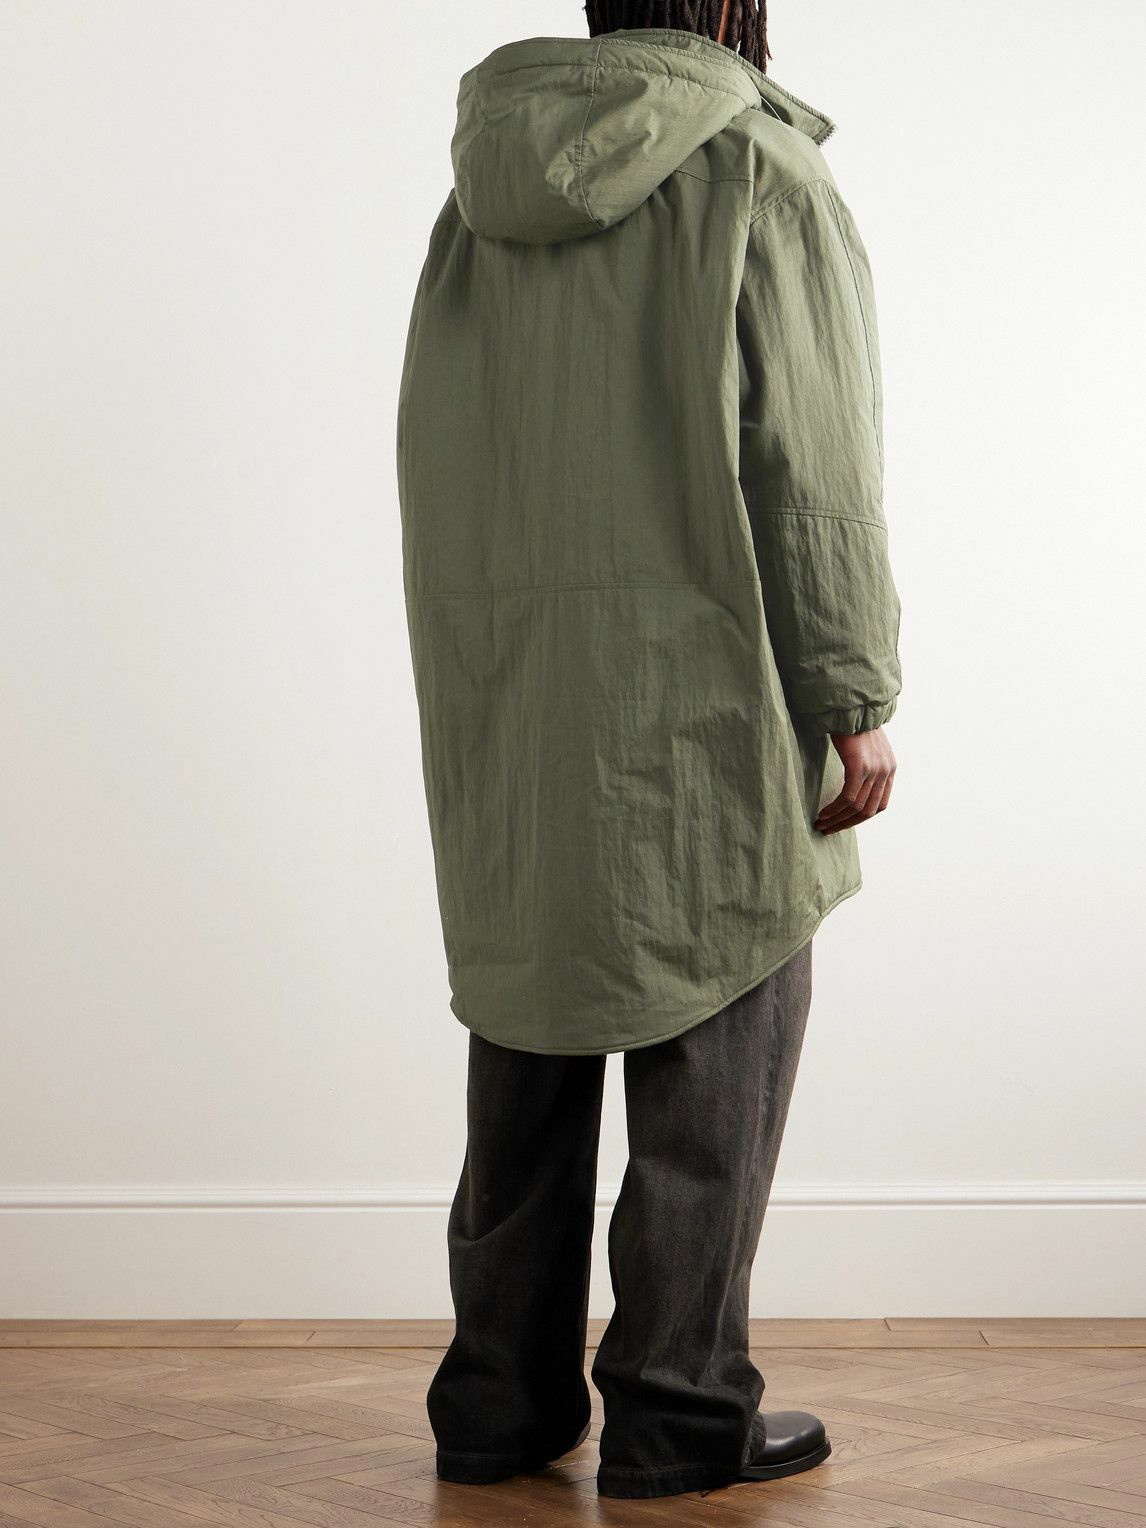 Our Legacy - Fenrir Padded Cotton-Blend Parka - Green Our Legacy